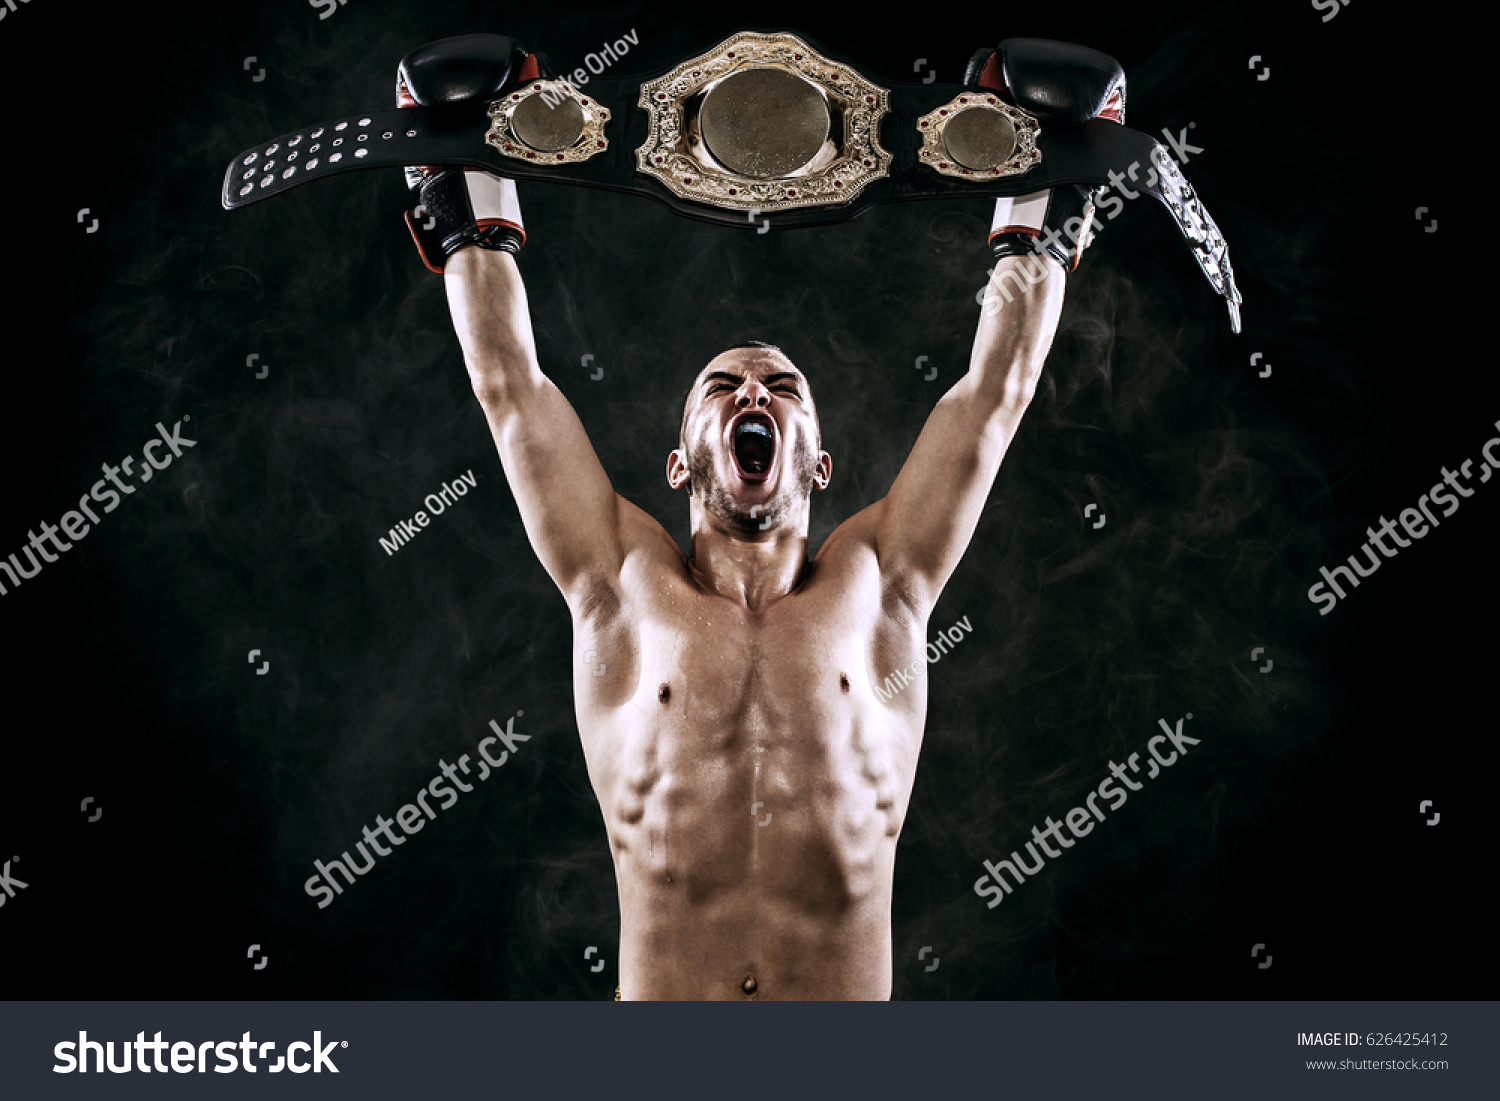 Boxer with Champion belt celebrating flawless victory isolated on black background with copy Space.. #626425412